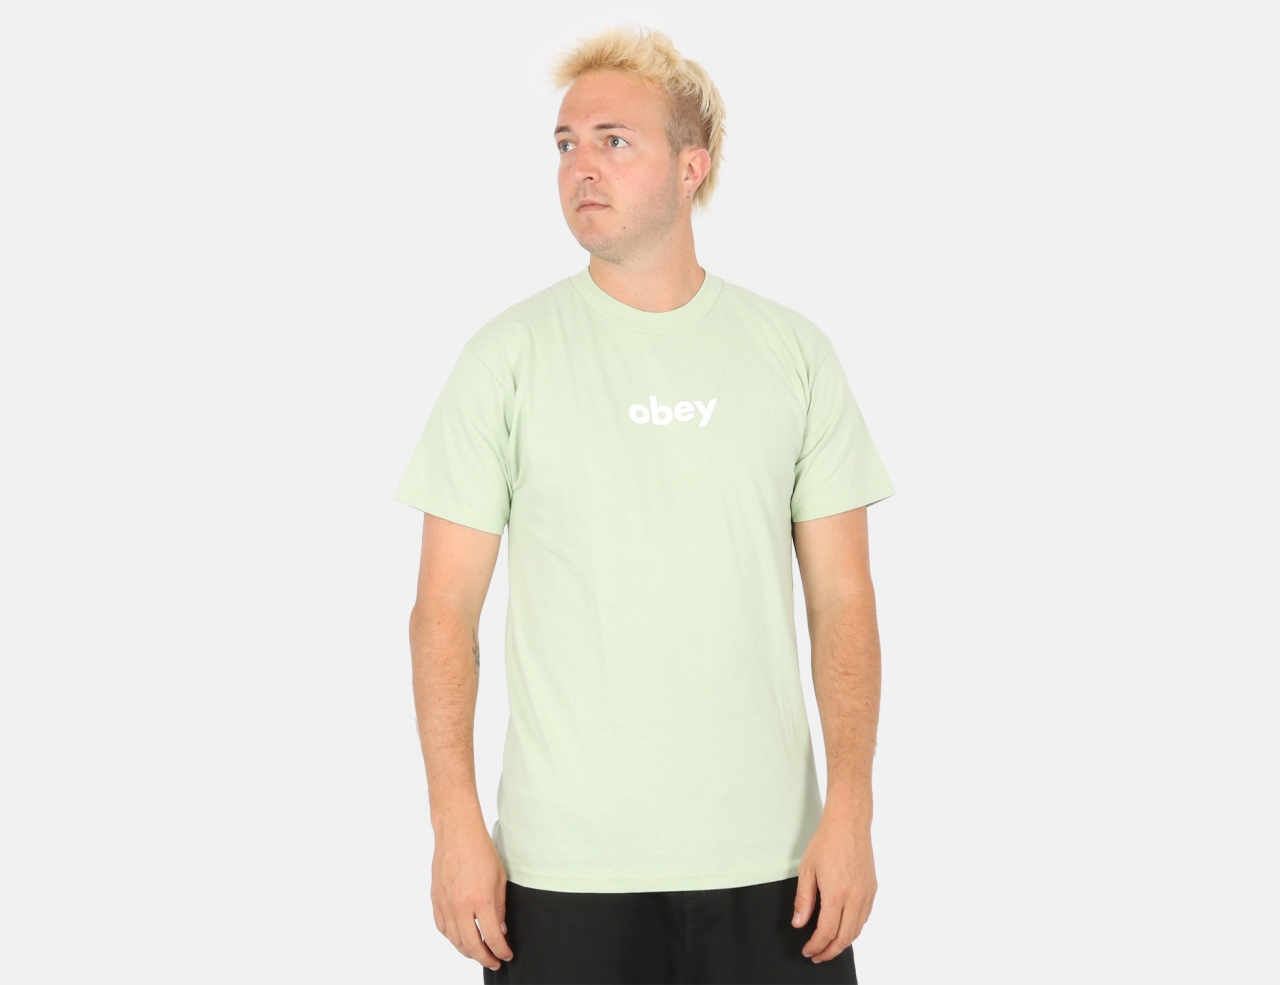 Obey Lower Case 2 T-Shirt - Cucumber